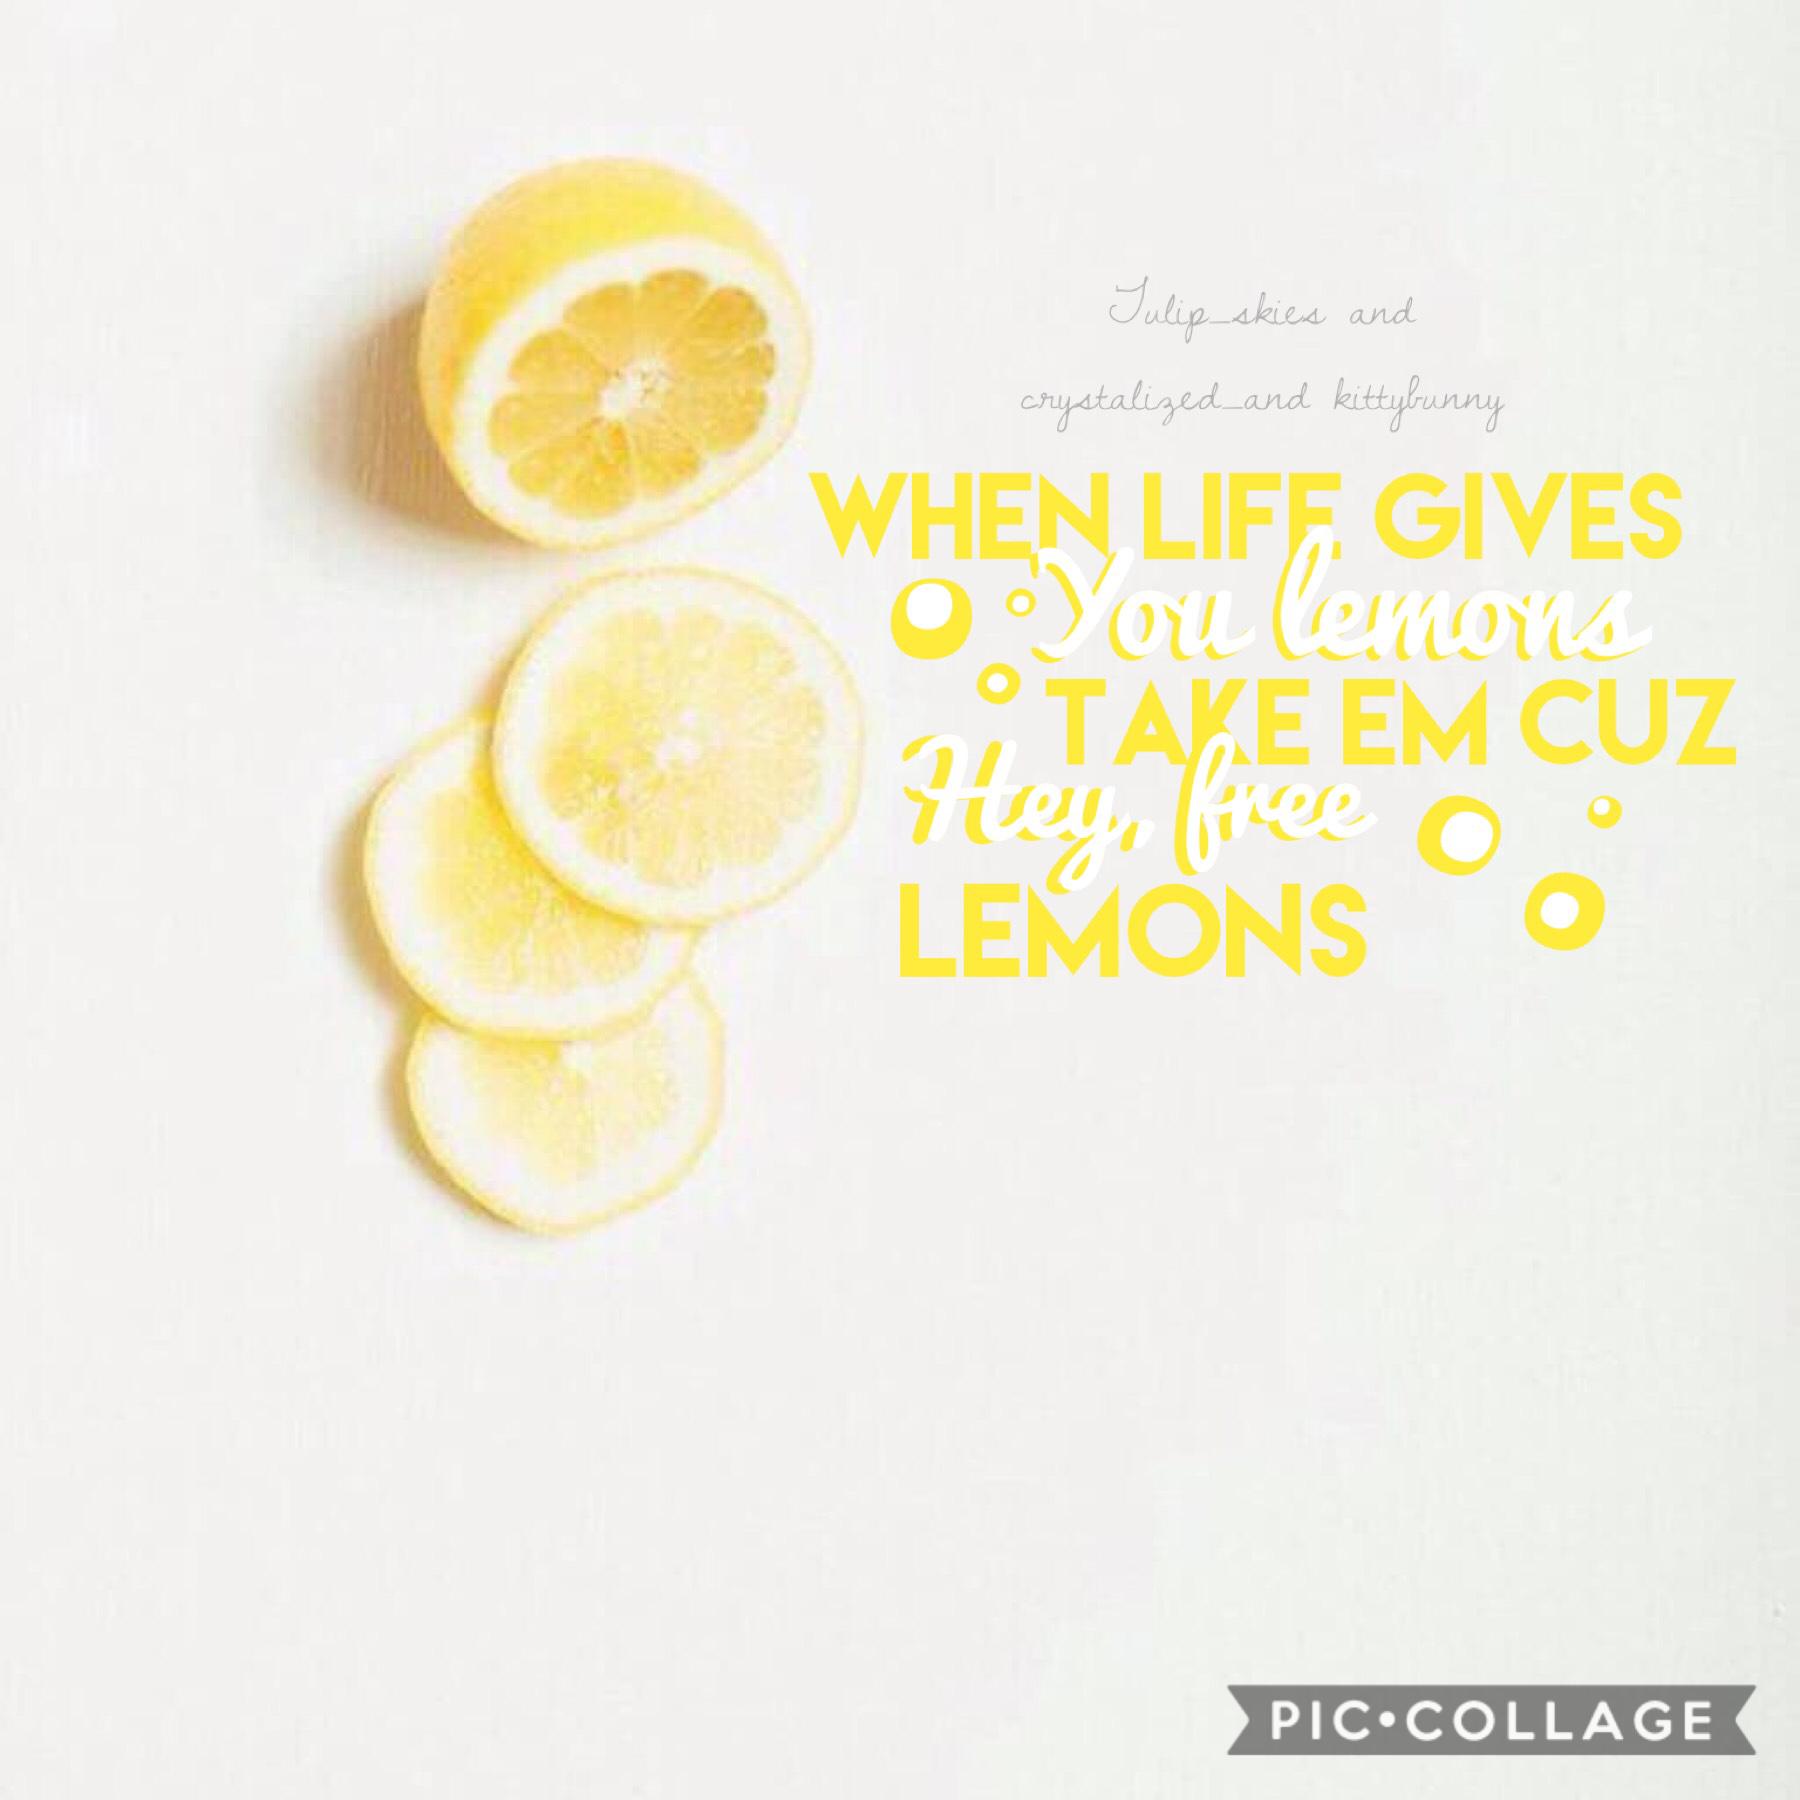 🍋Tap🍋
🍉Tell me what’s your favorite fruit in the comments🍉
 🥝 Mines kiwis 🥝 